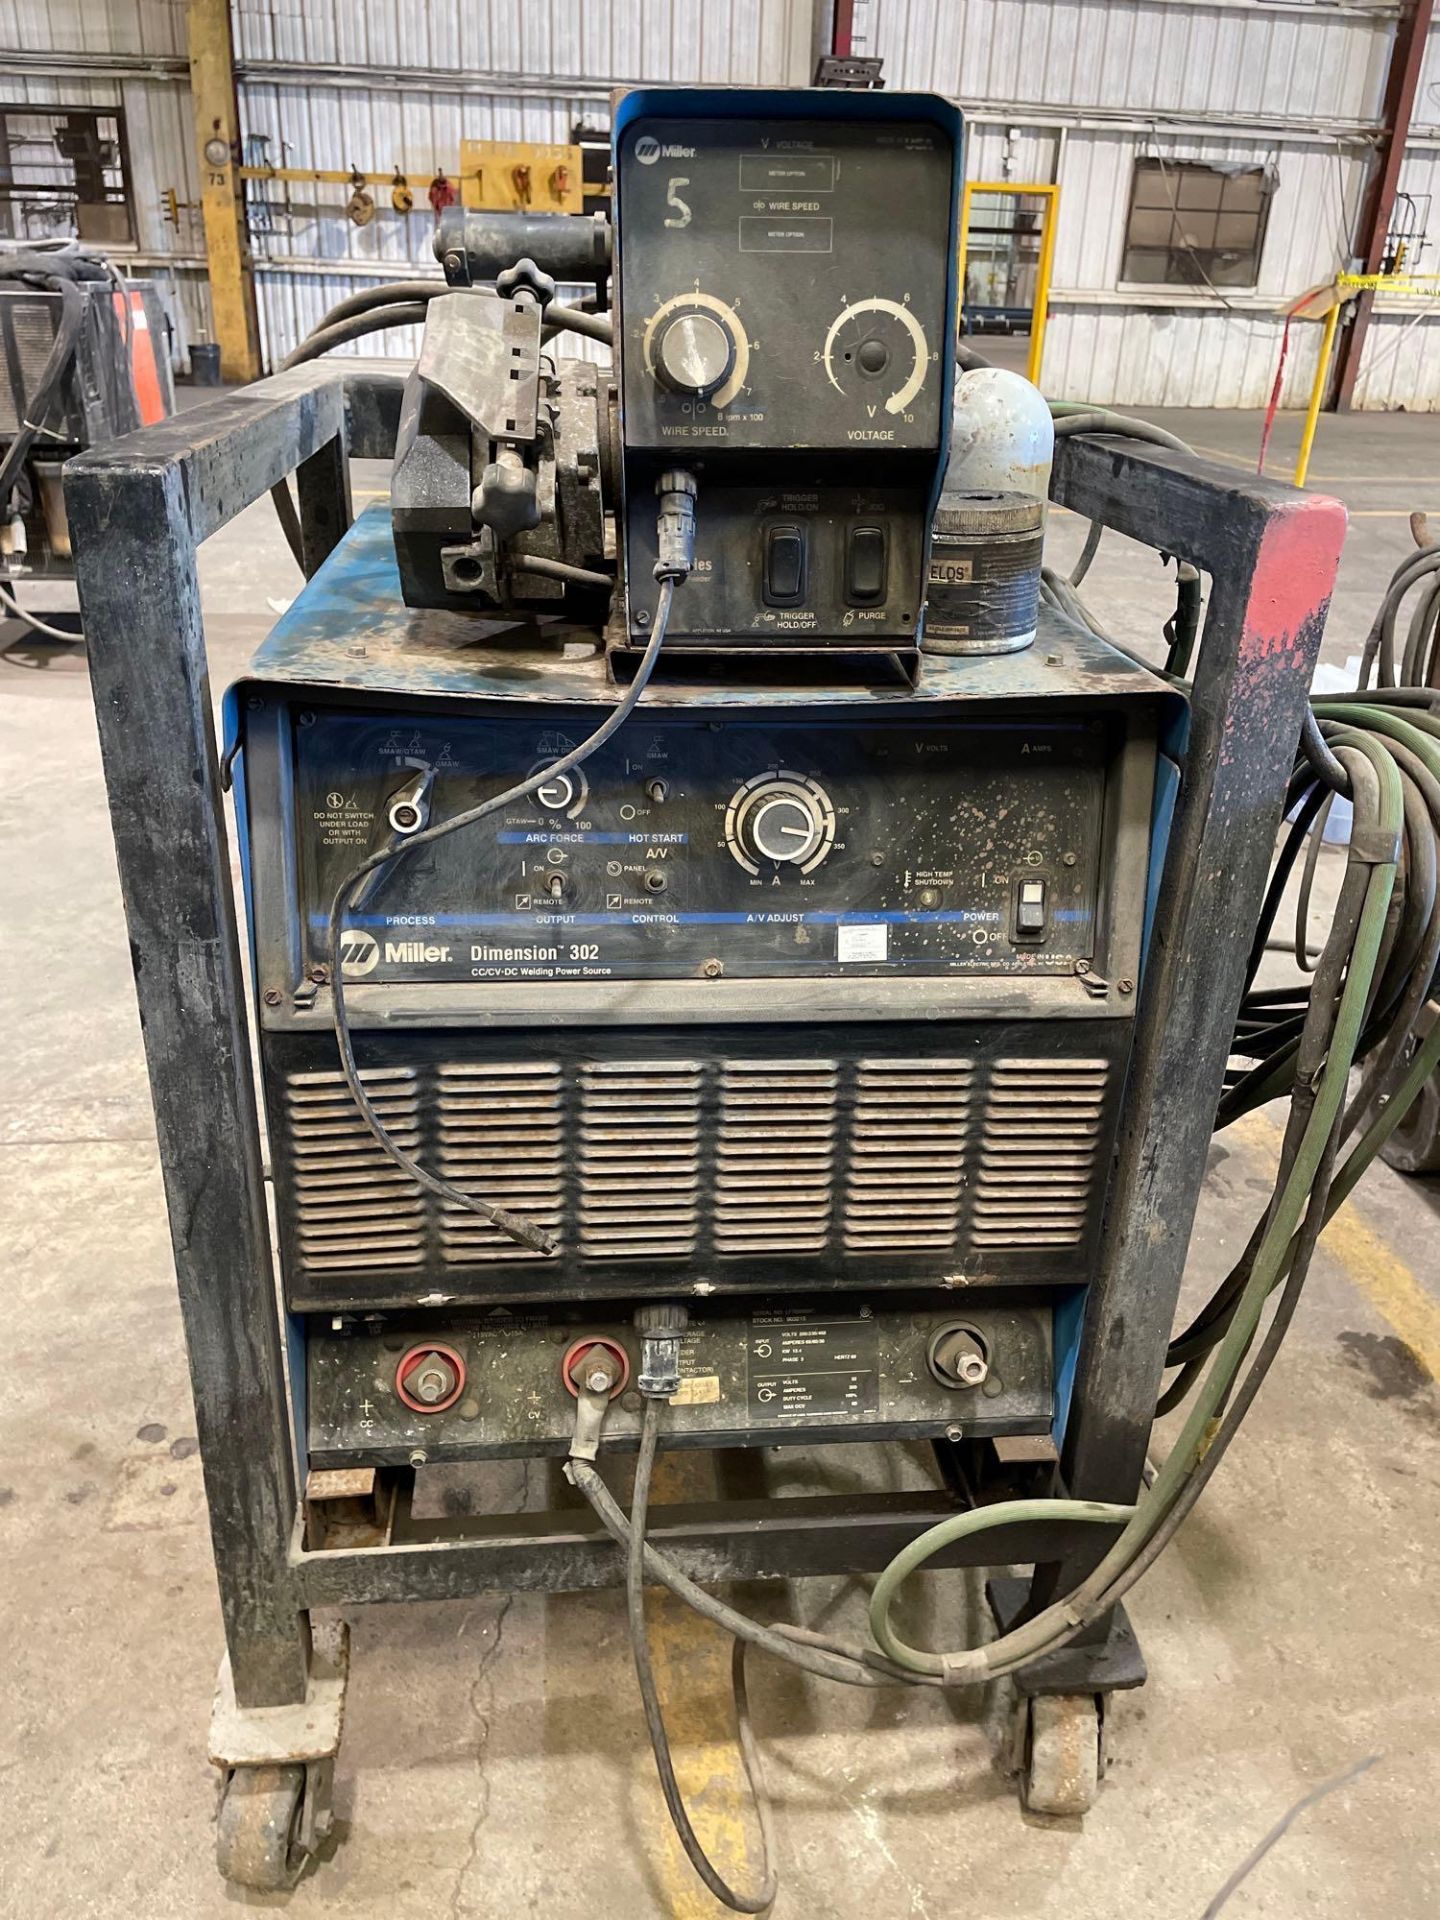 Miller Dimension 302 CC/DC Welding Power Source, with 70 Series 24V Wire Feeder.